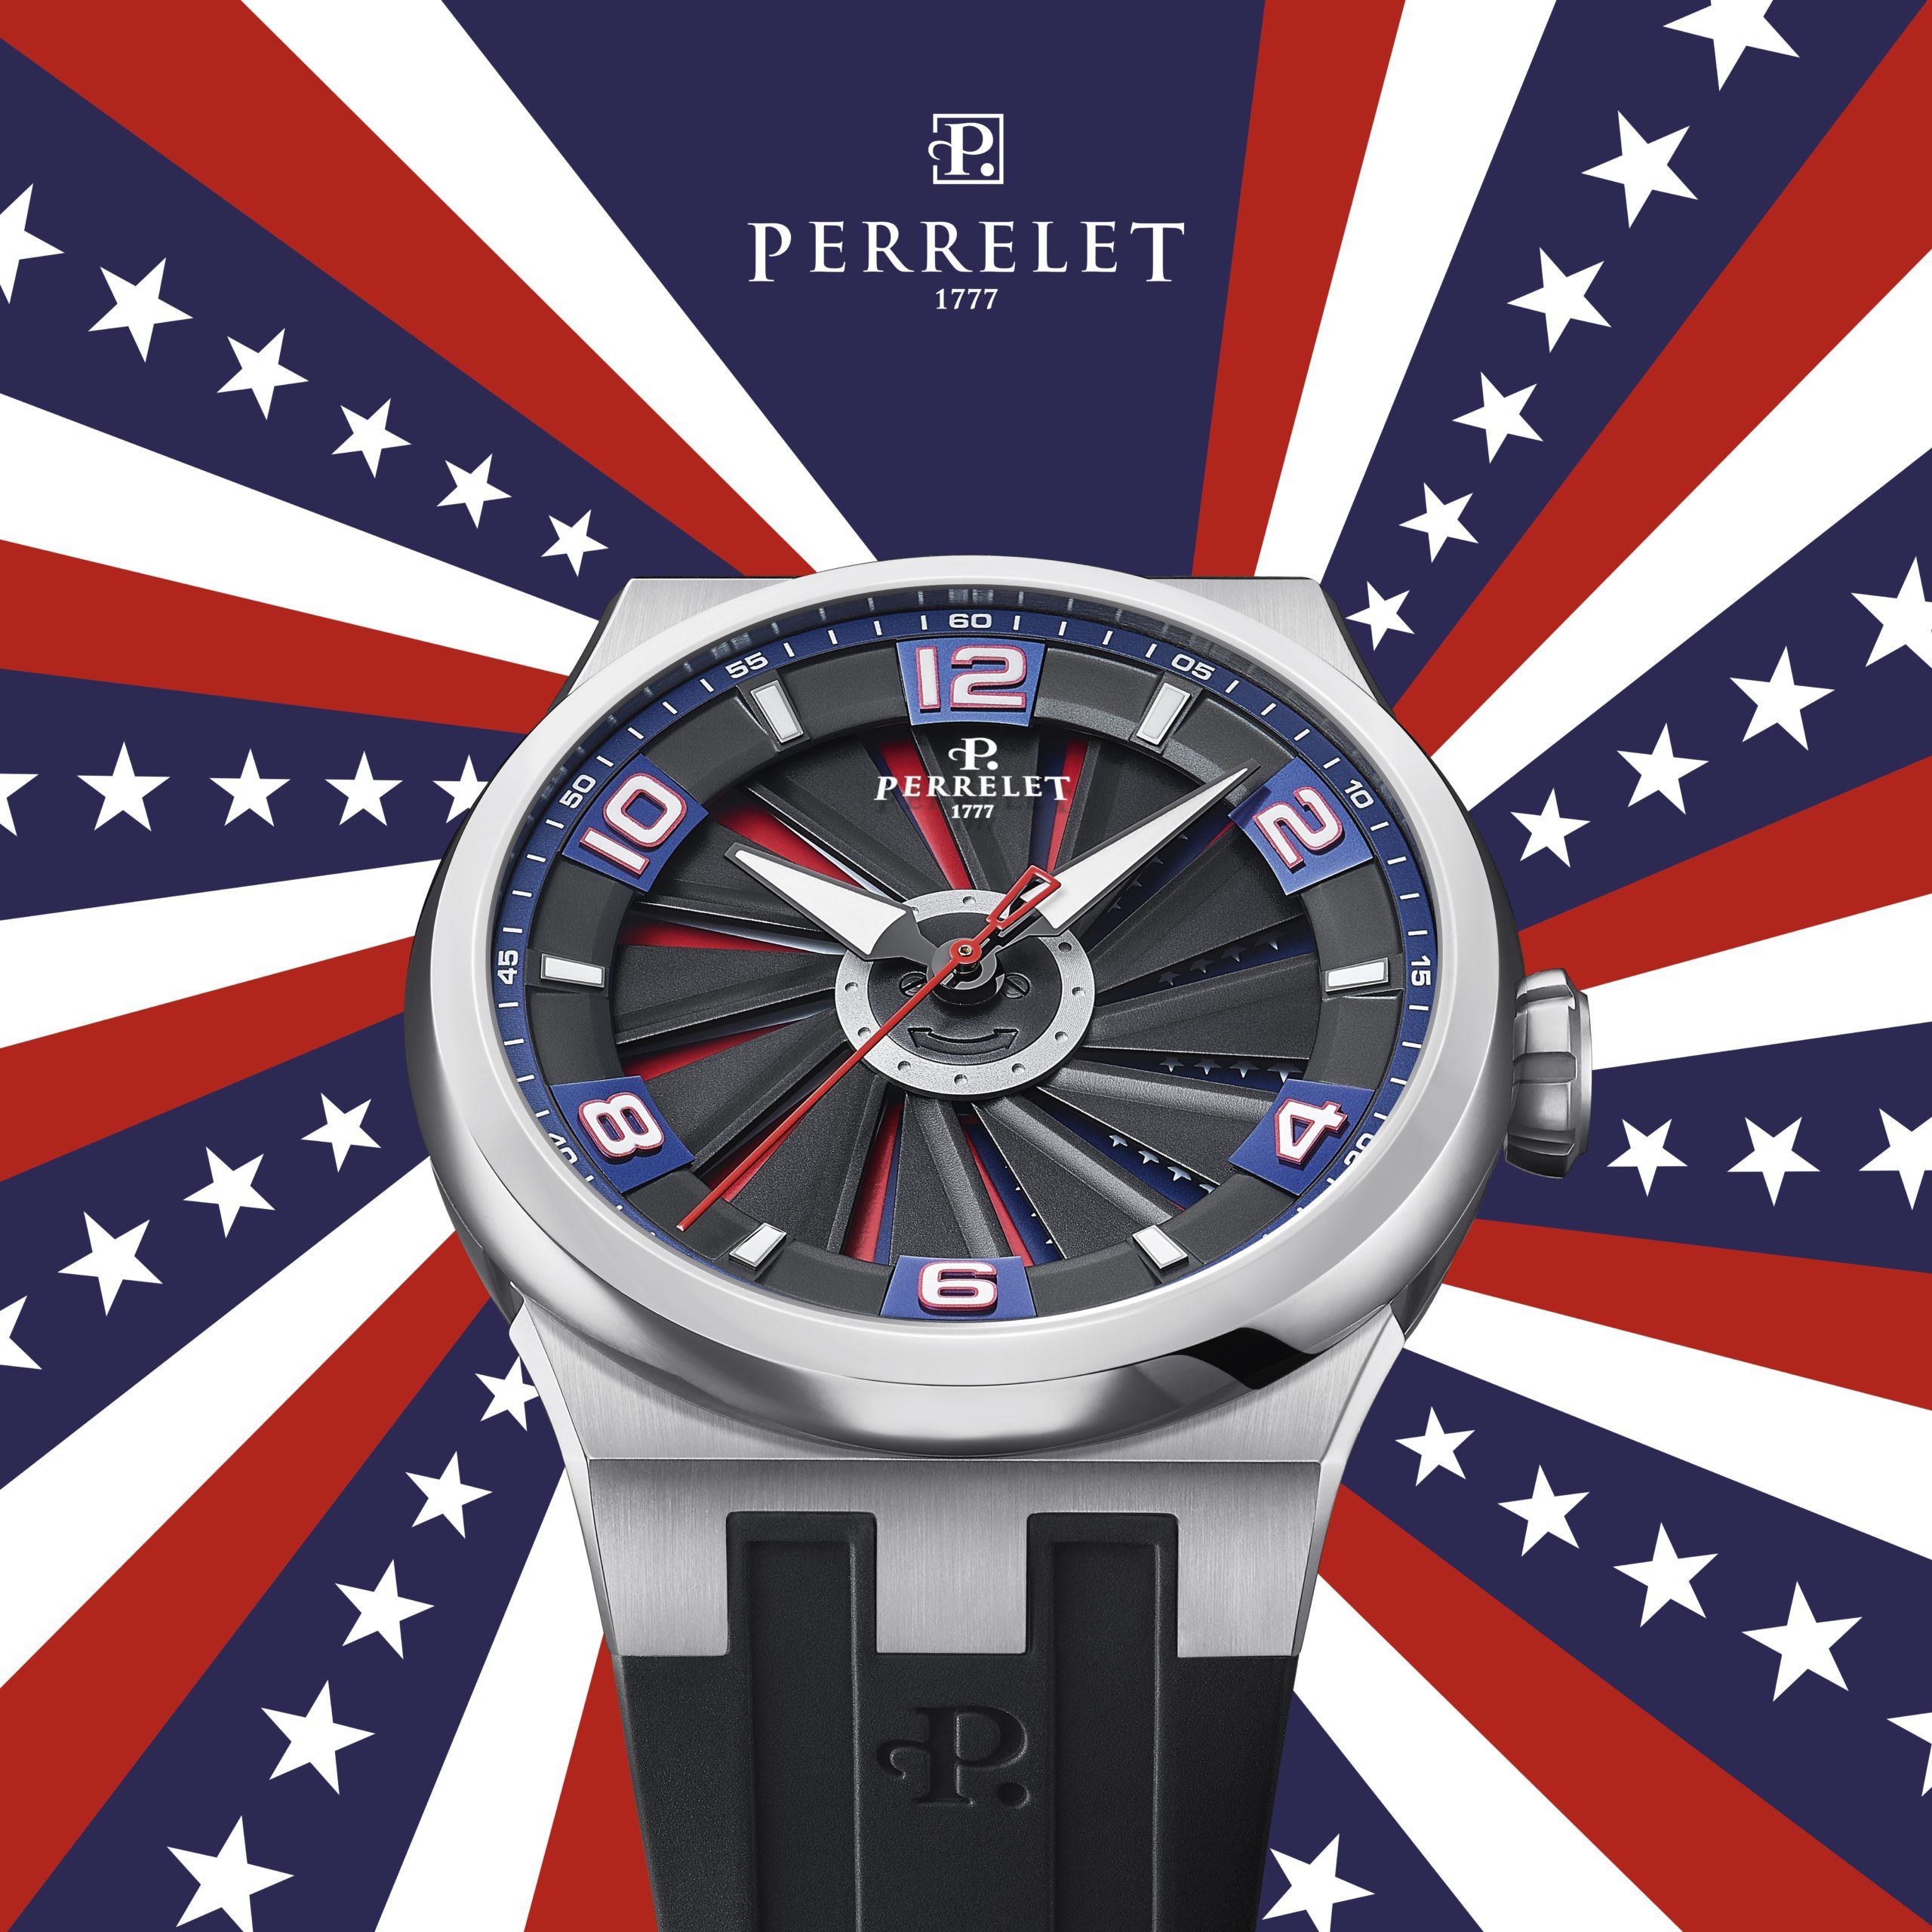 Sponsored: Perrelet Pays Homage to the US with the New “TURBINE UNITED”